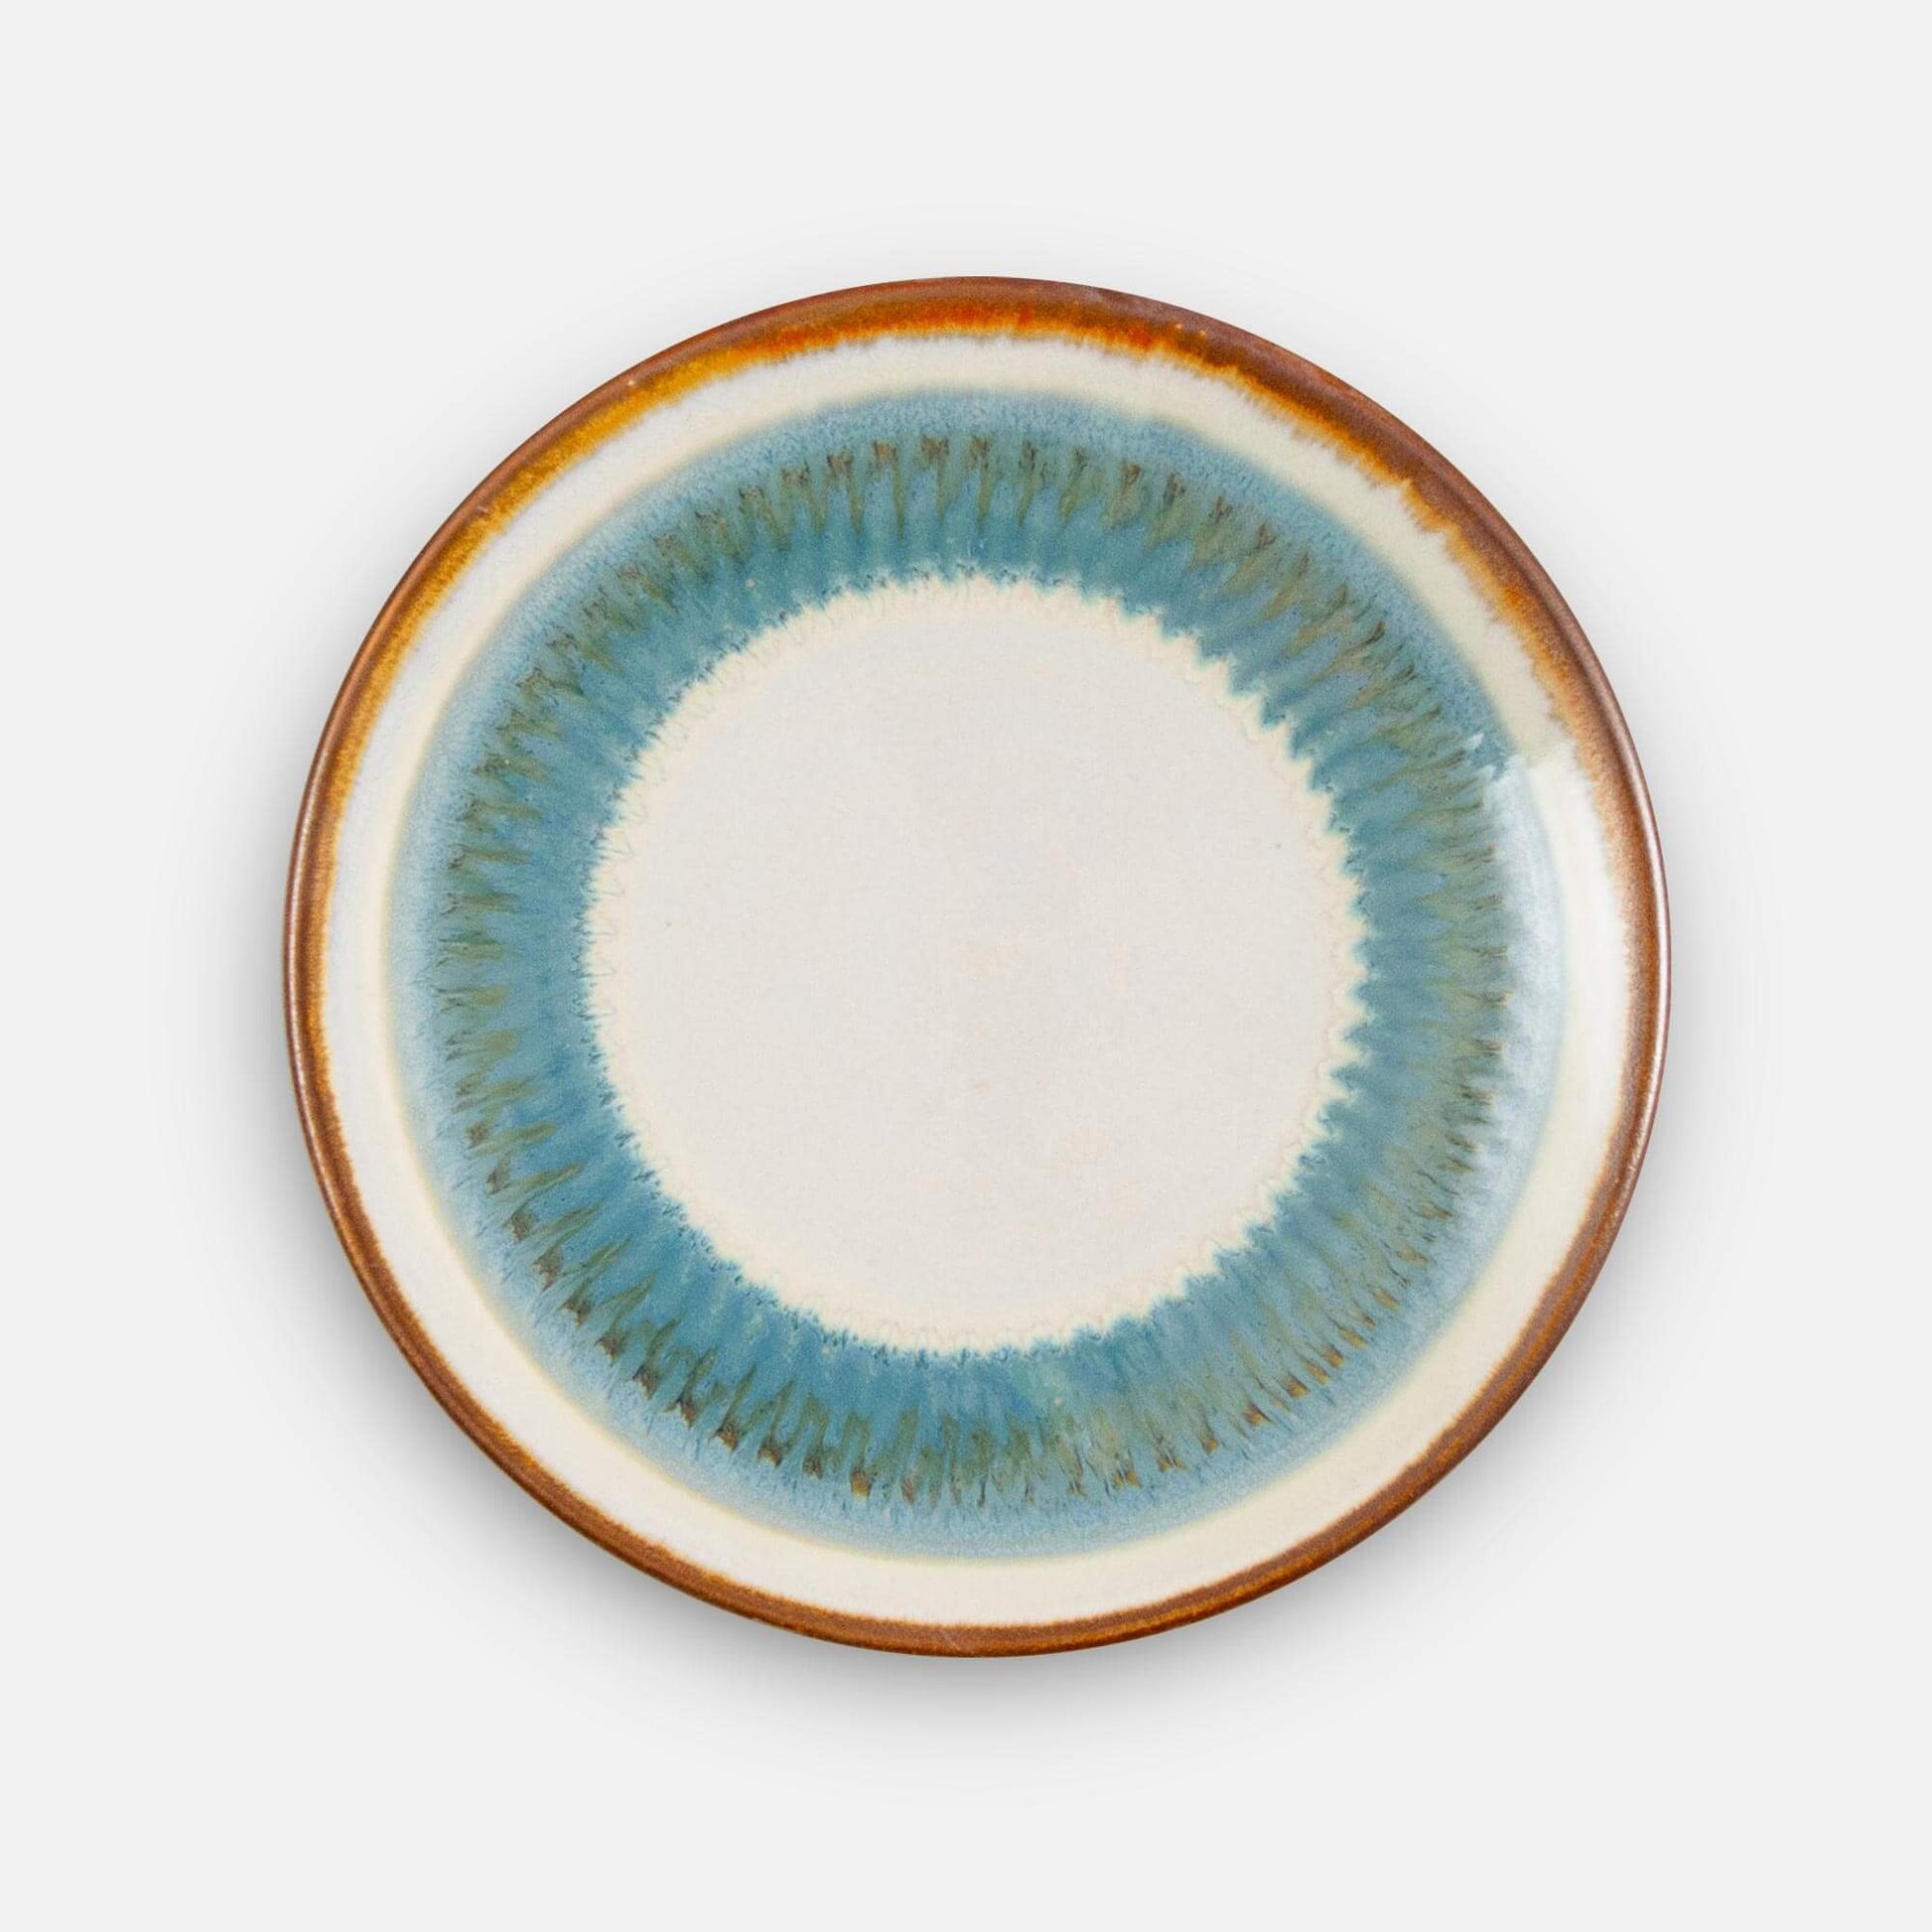 Handmade Pottery Classic Dinner Plate in Ivory & Blue pattern made by Georgetown Pottery in Maine